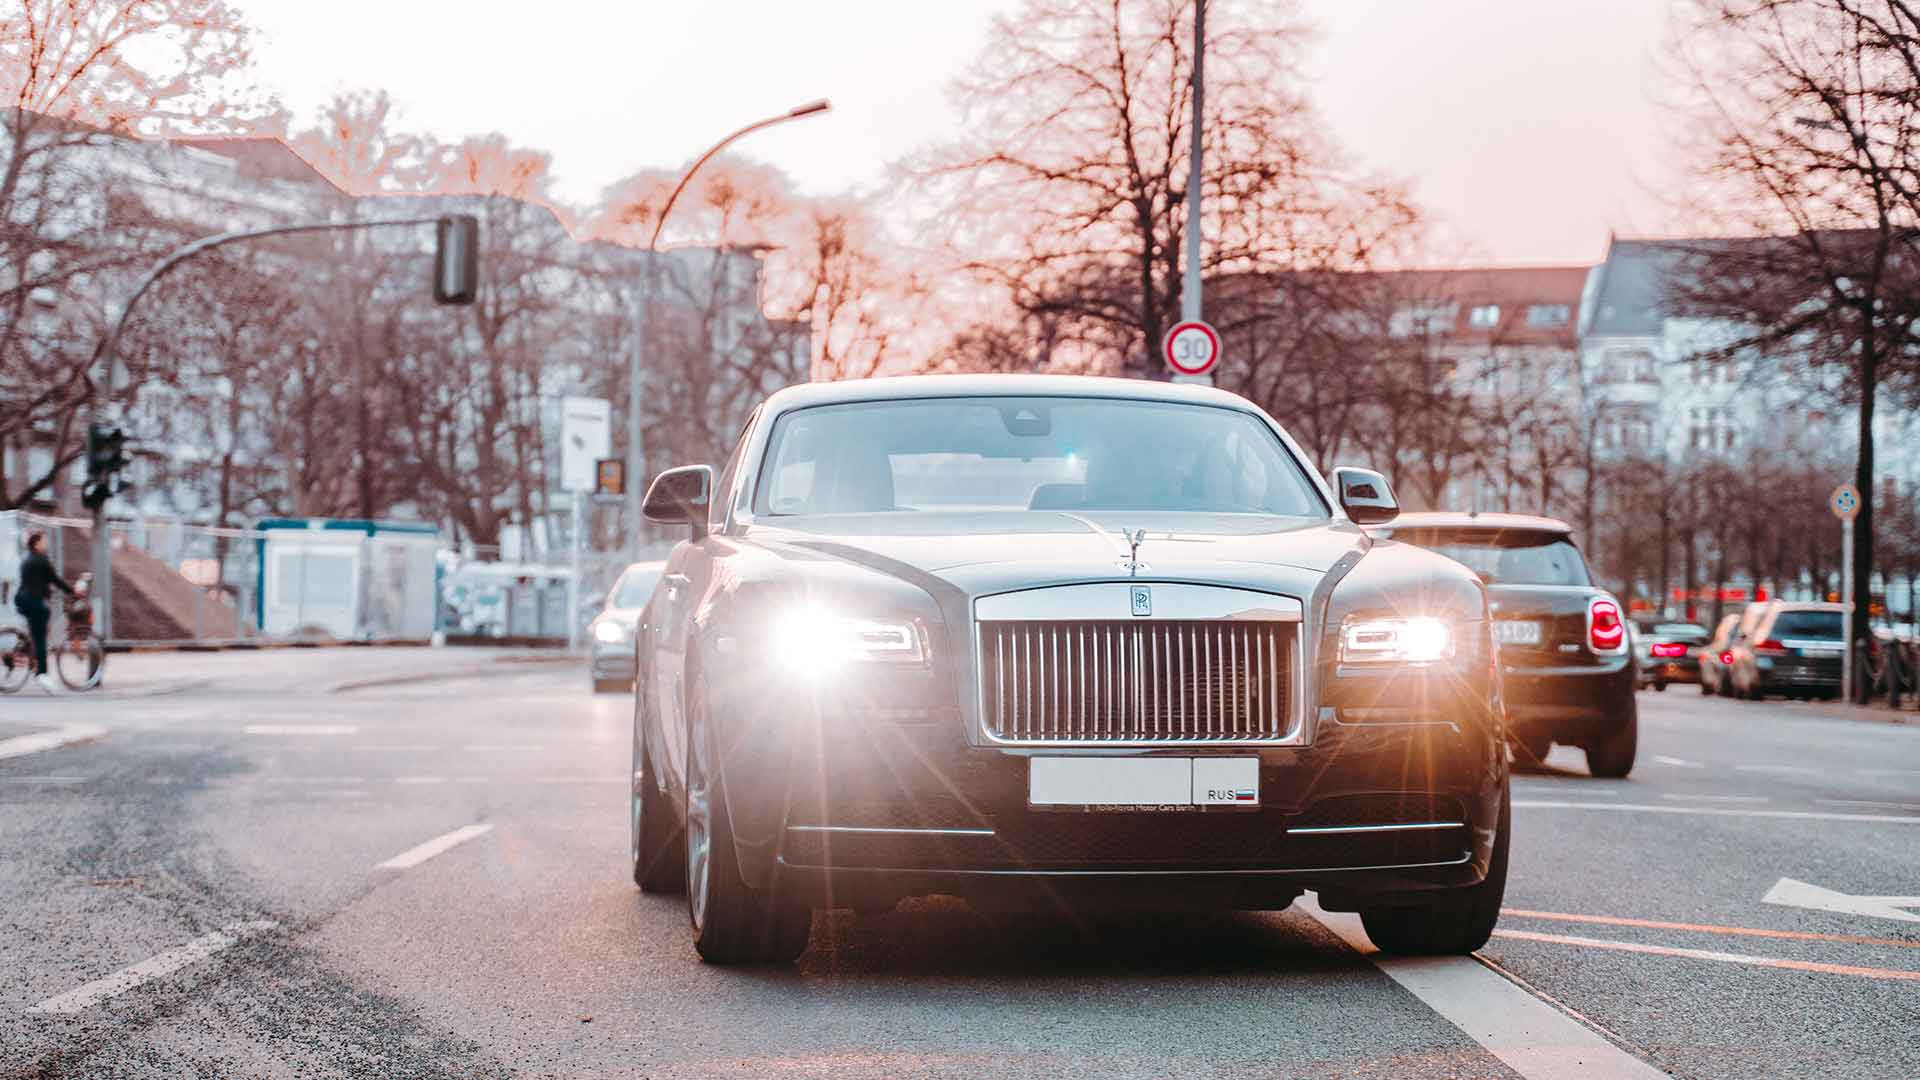 Will this Rolls Royce on a city street eventually be an EV?